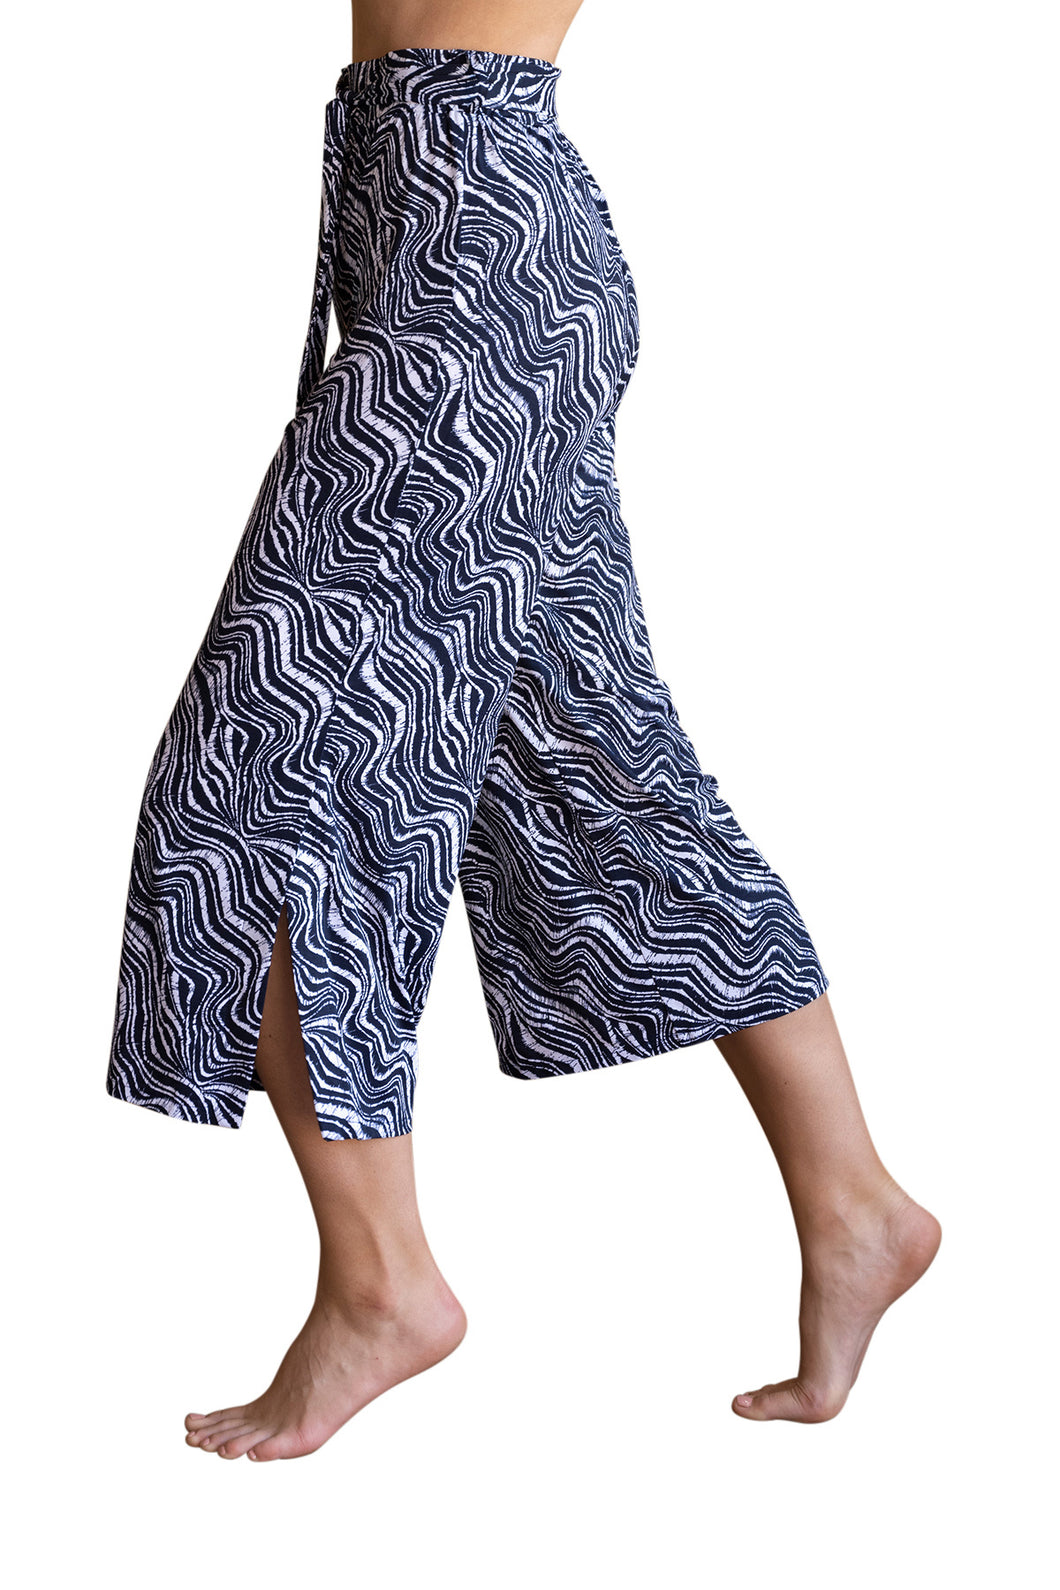 Marble Navy & White Print Pull On Wide Leg Crop Pant with Tie Belt